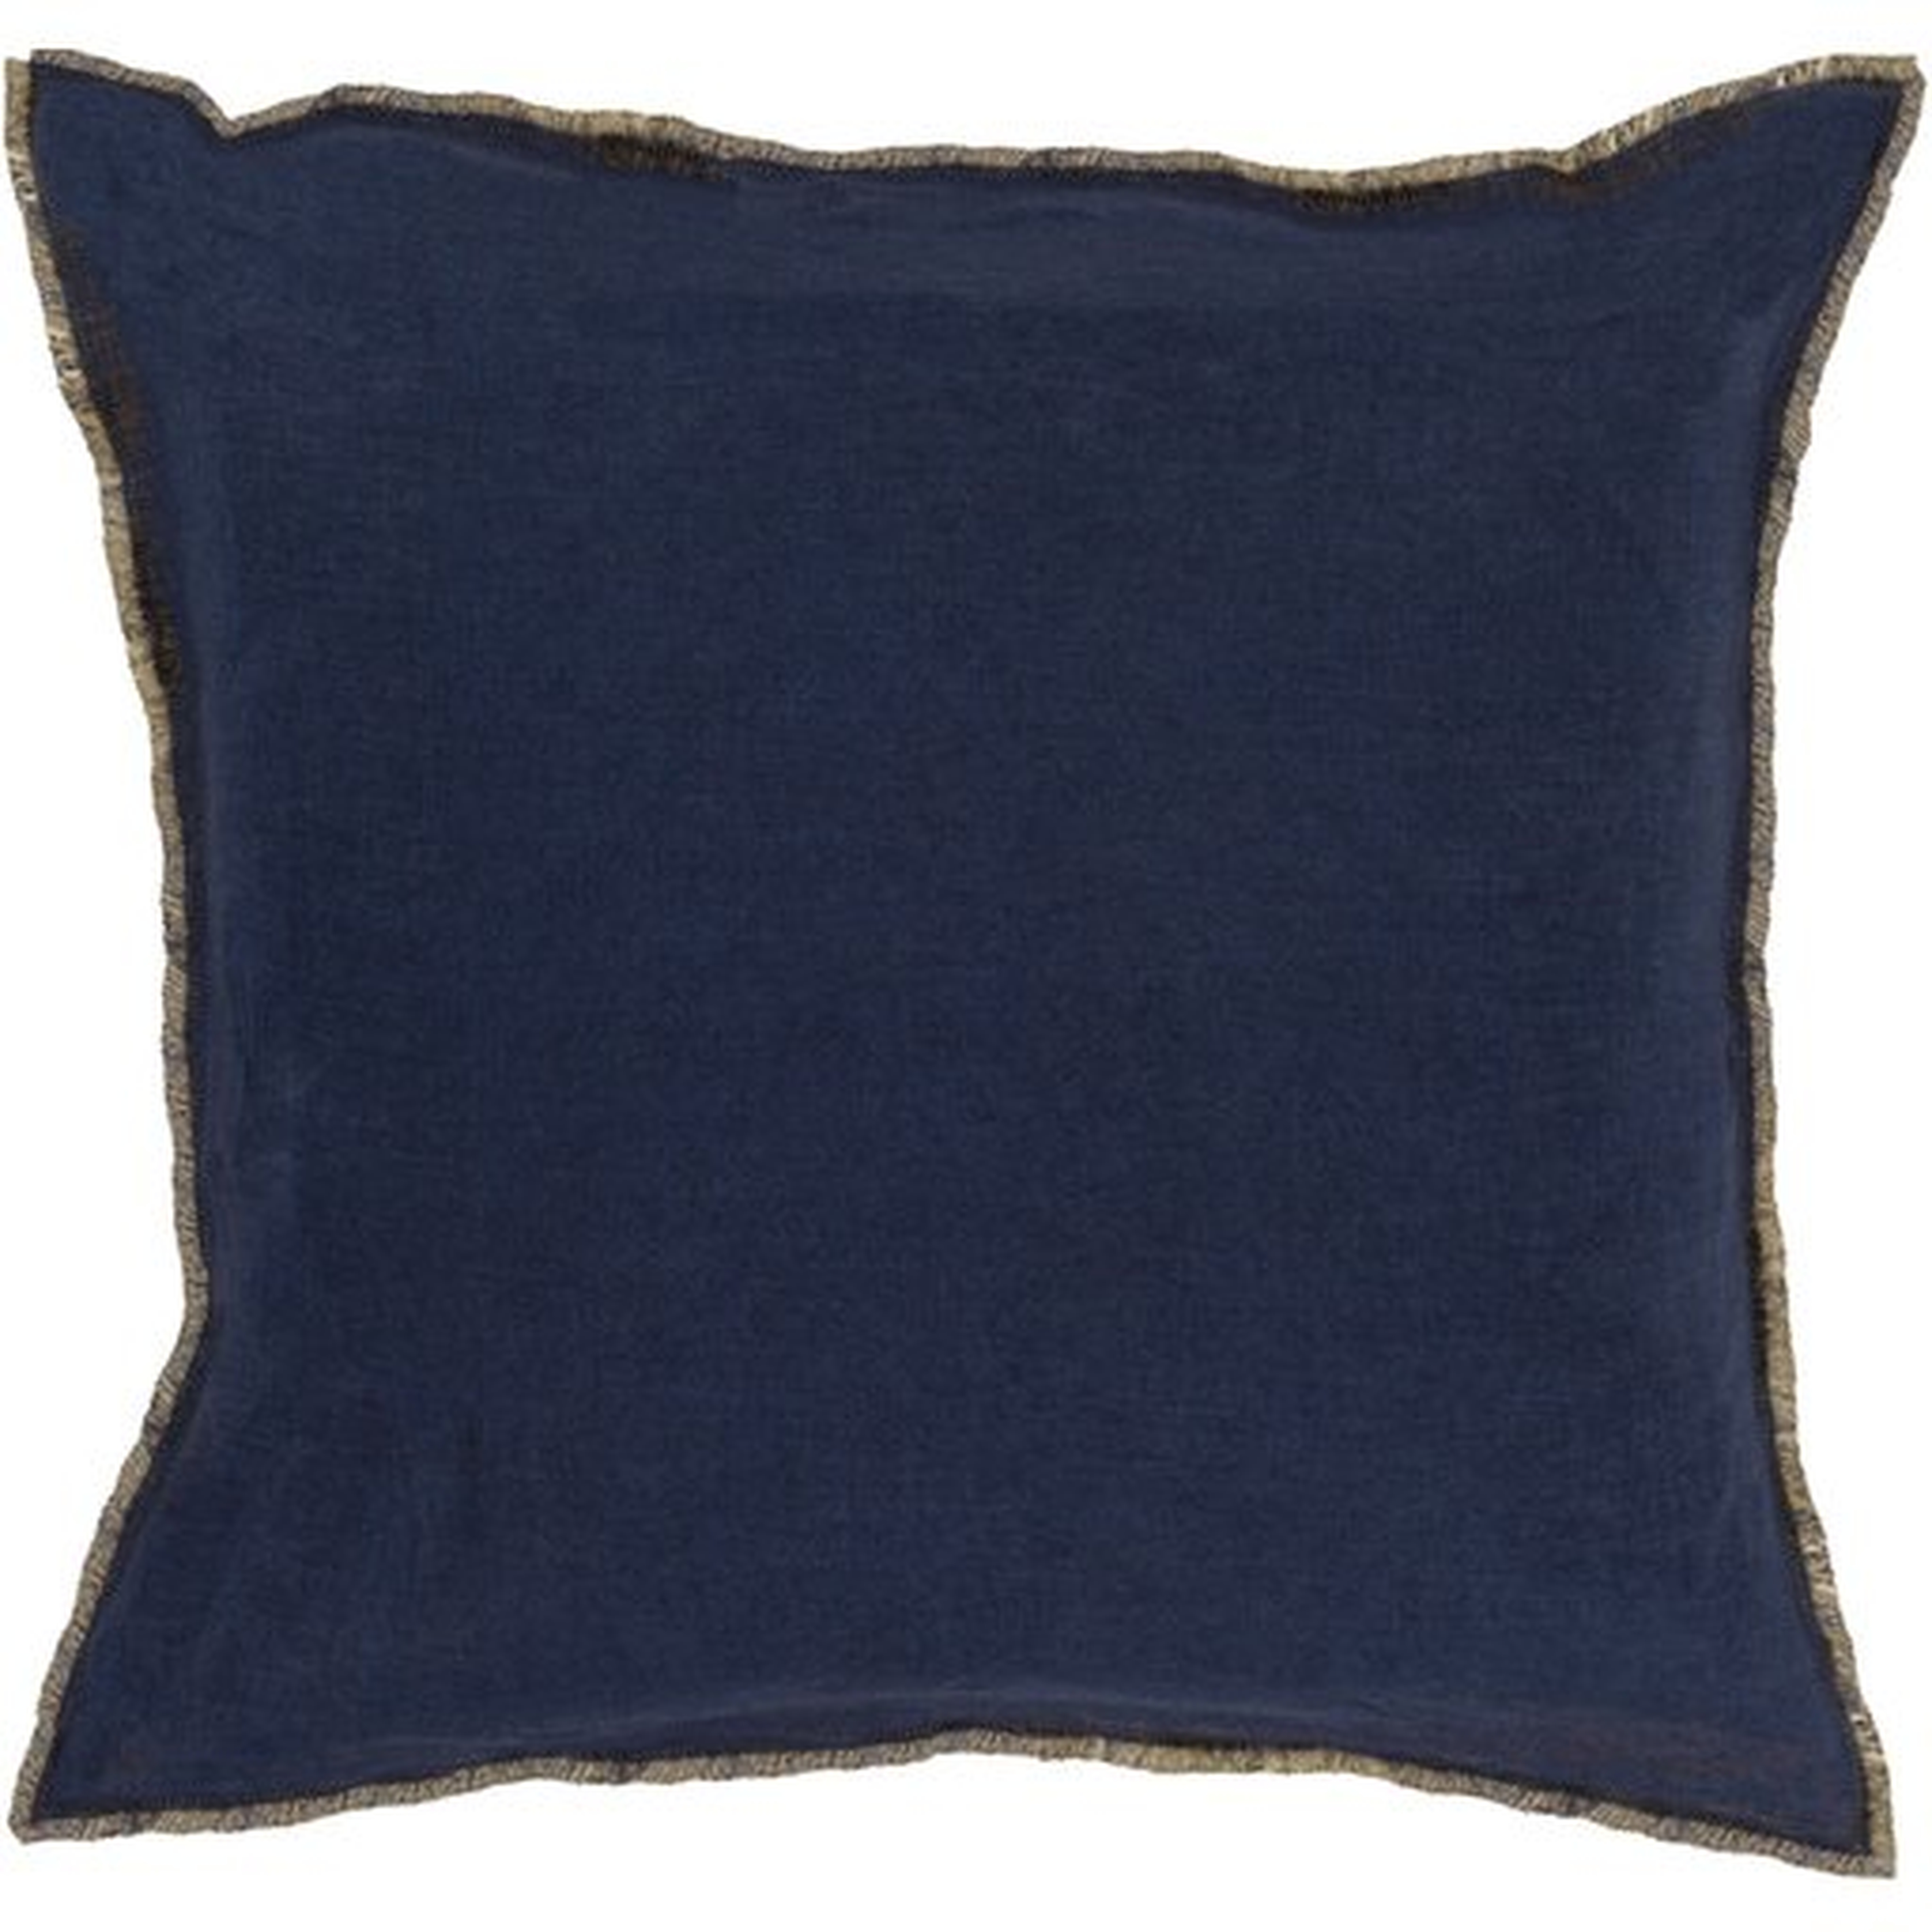 Clearance Eyelash EYL-008 Throw Pillow-  Navy, Bright Yellow- Pillow Shell with Down Insert- 18" x 18" - Surya